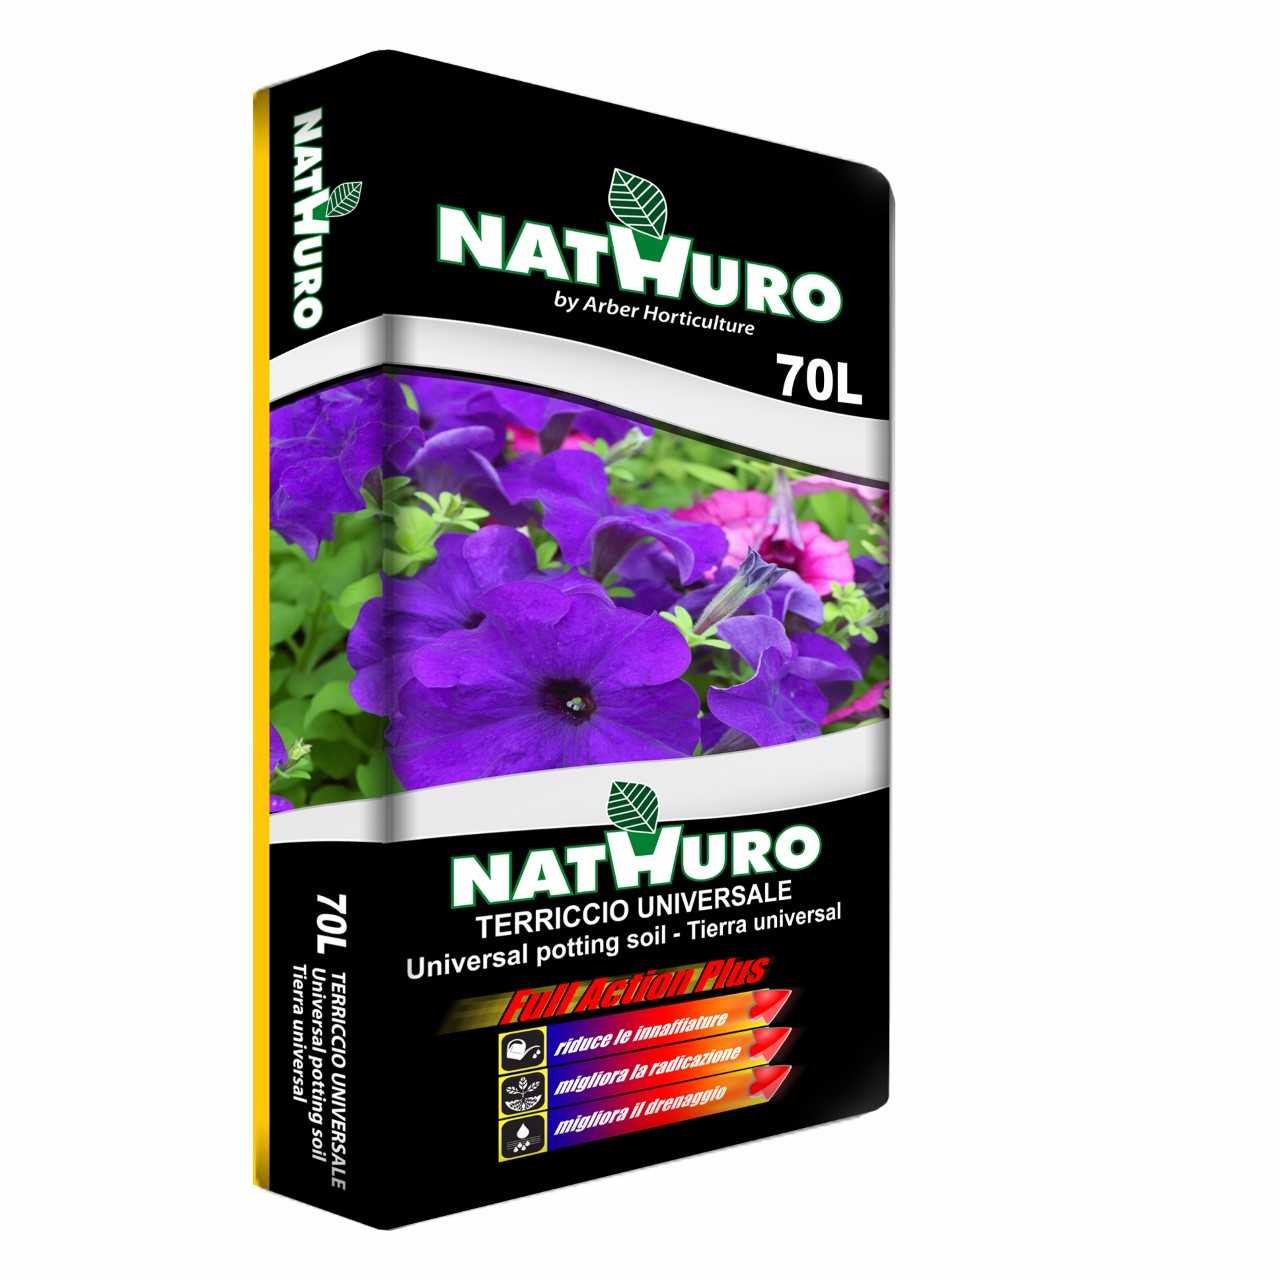 Nathuro Full Action - Substrato universale - Sacco 70 lt